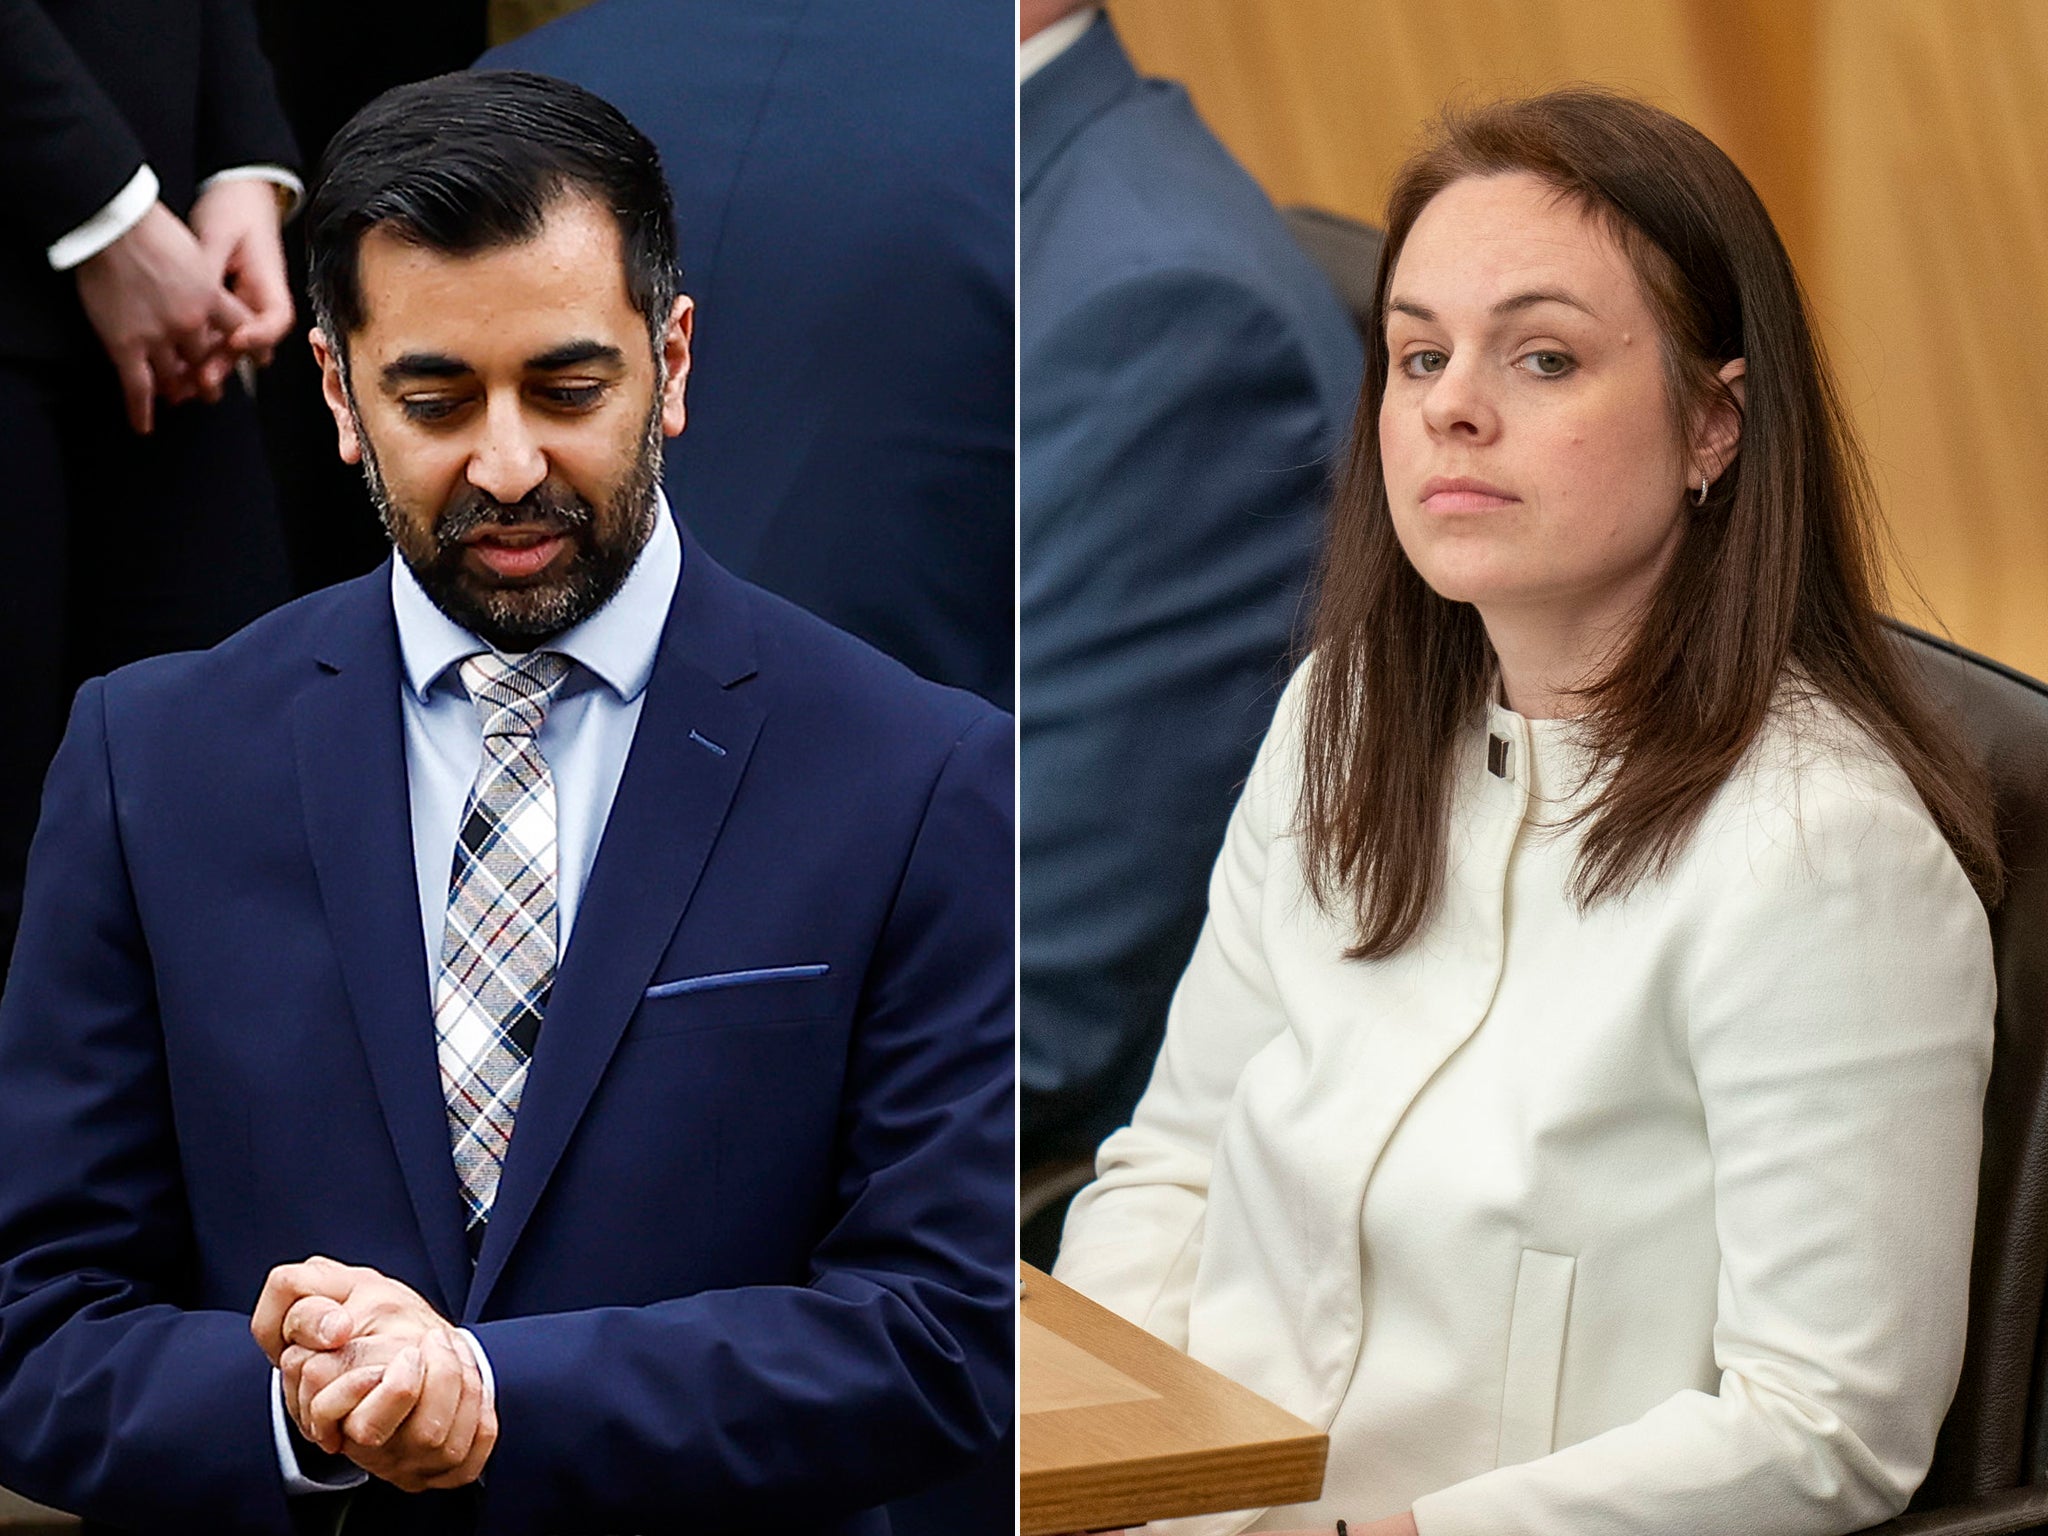 SNP leader Humza Yousaf and defeated leadership candidate Kate Forbes